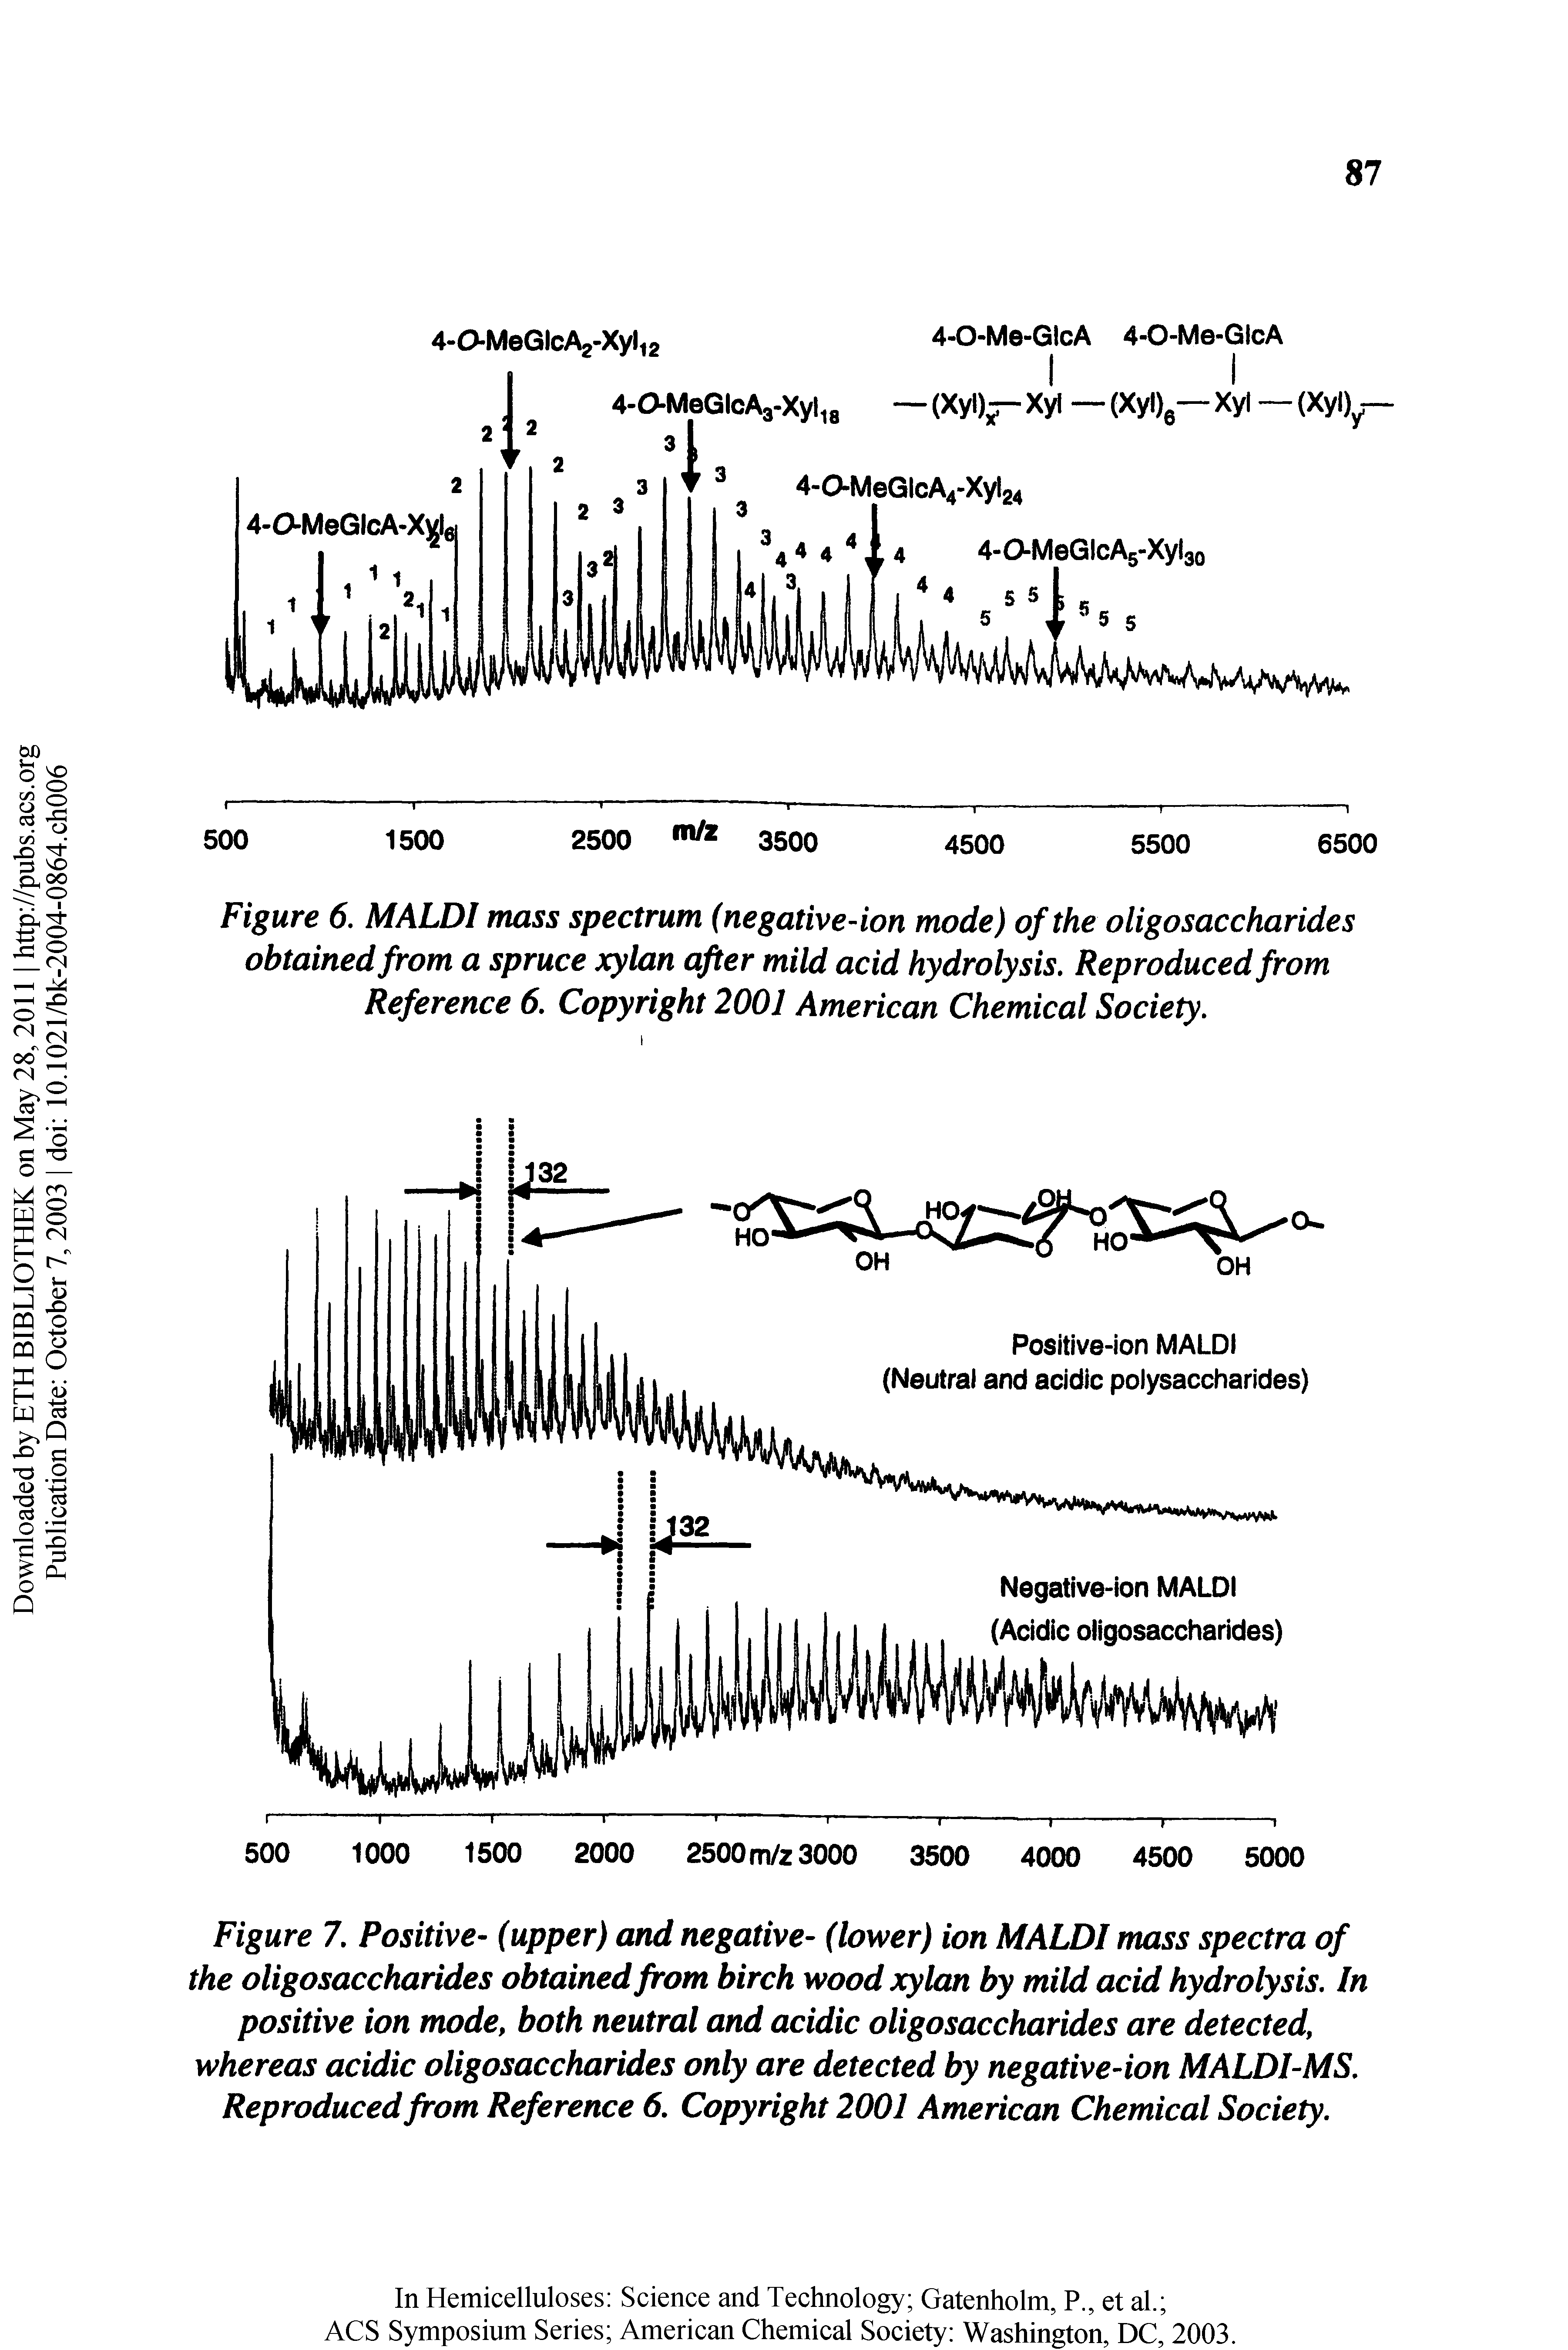 Figure 6. MALDI mass spectrum (negative-ion mode) of the oligosaccharides obtained from a spruce xylan after mild acid hydrolysis. Reproduced from Reference 6. Copyright 2001 American Chemical Society.